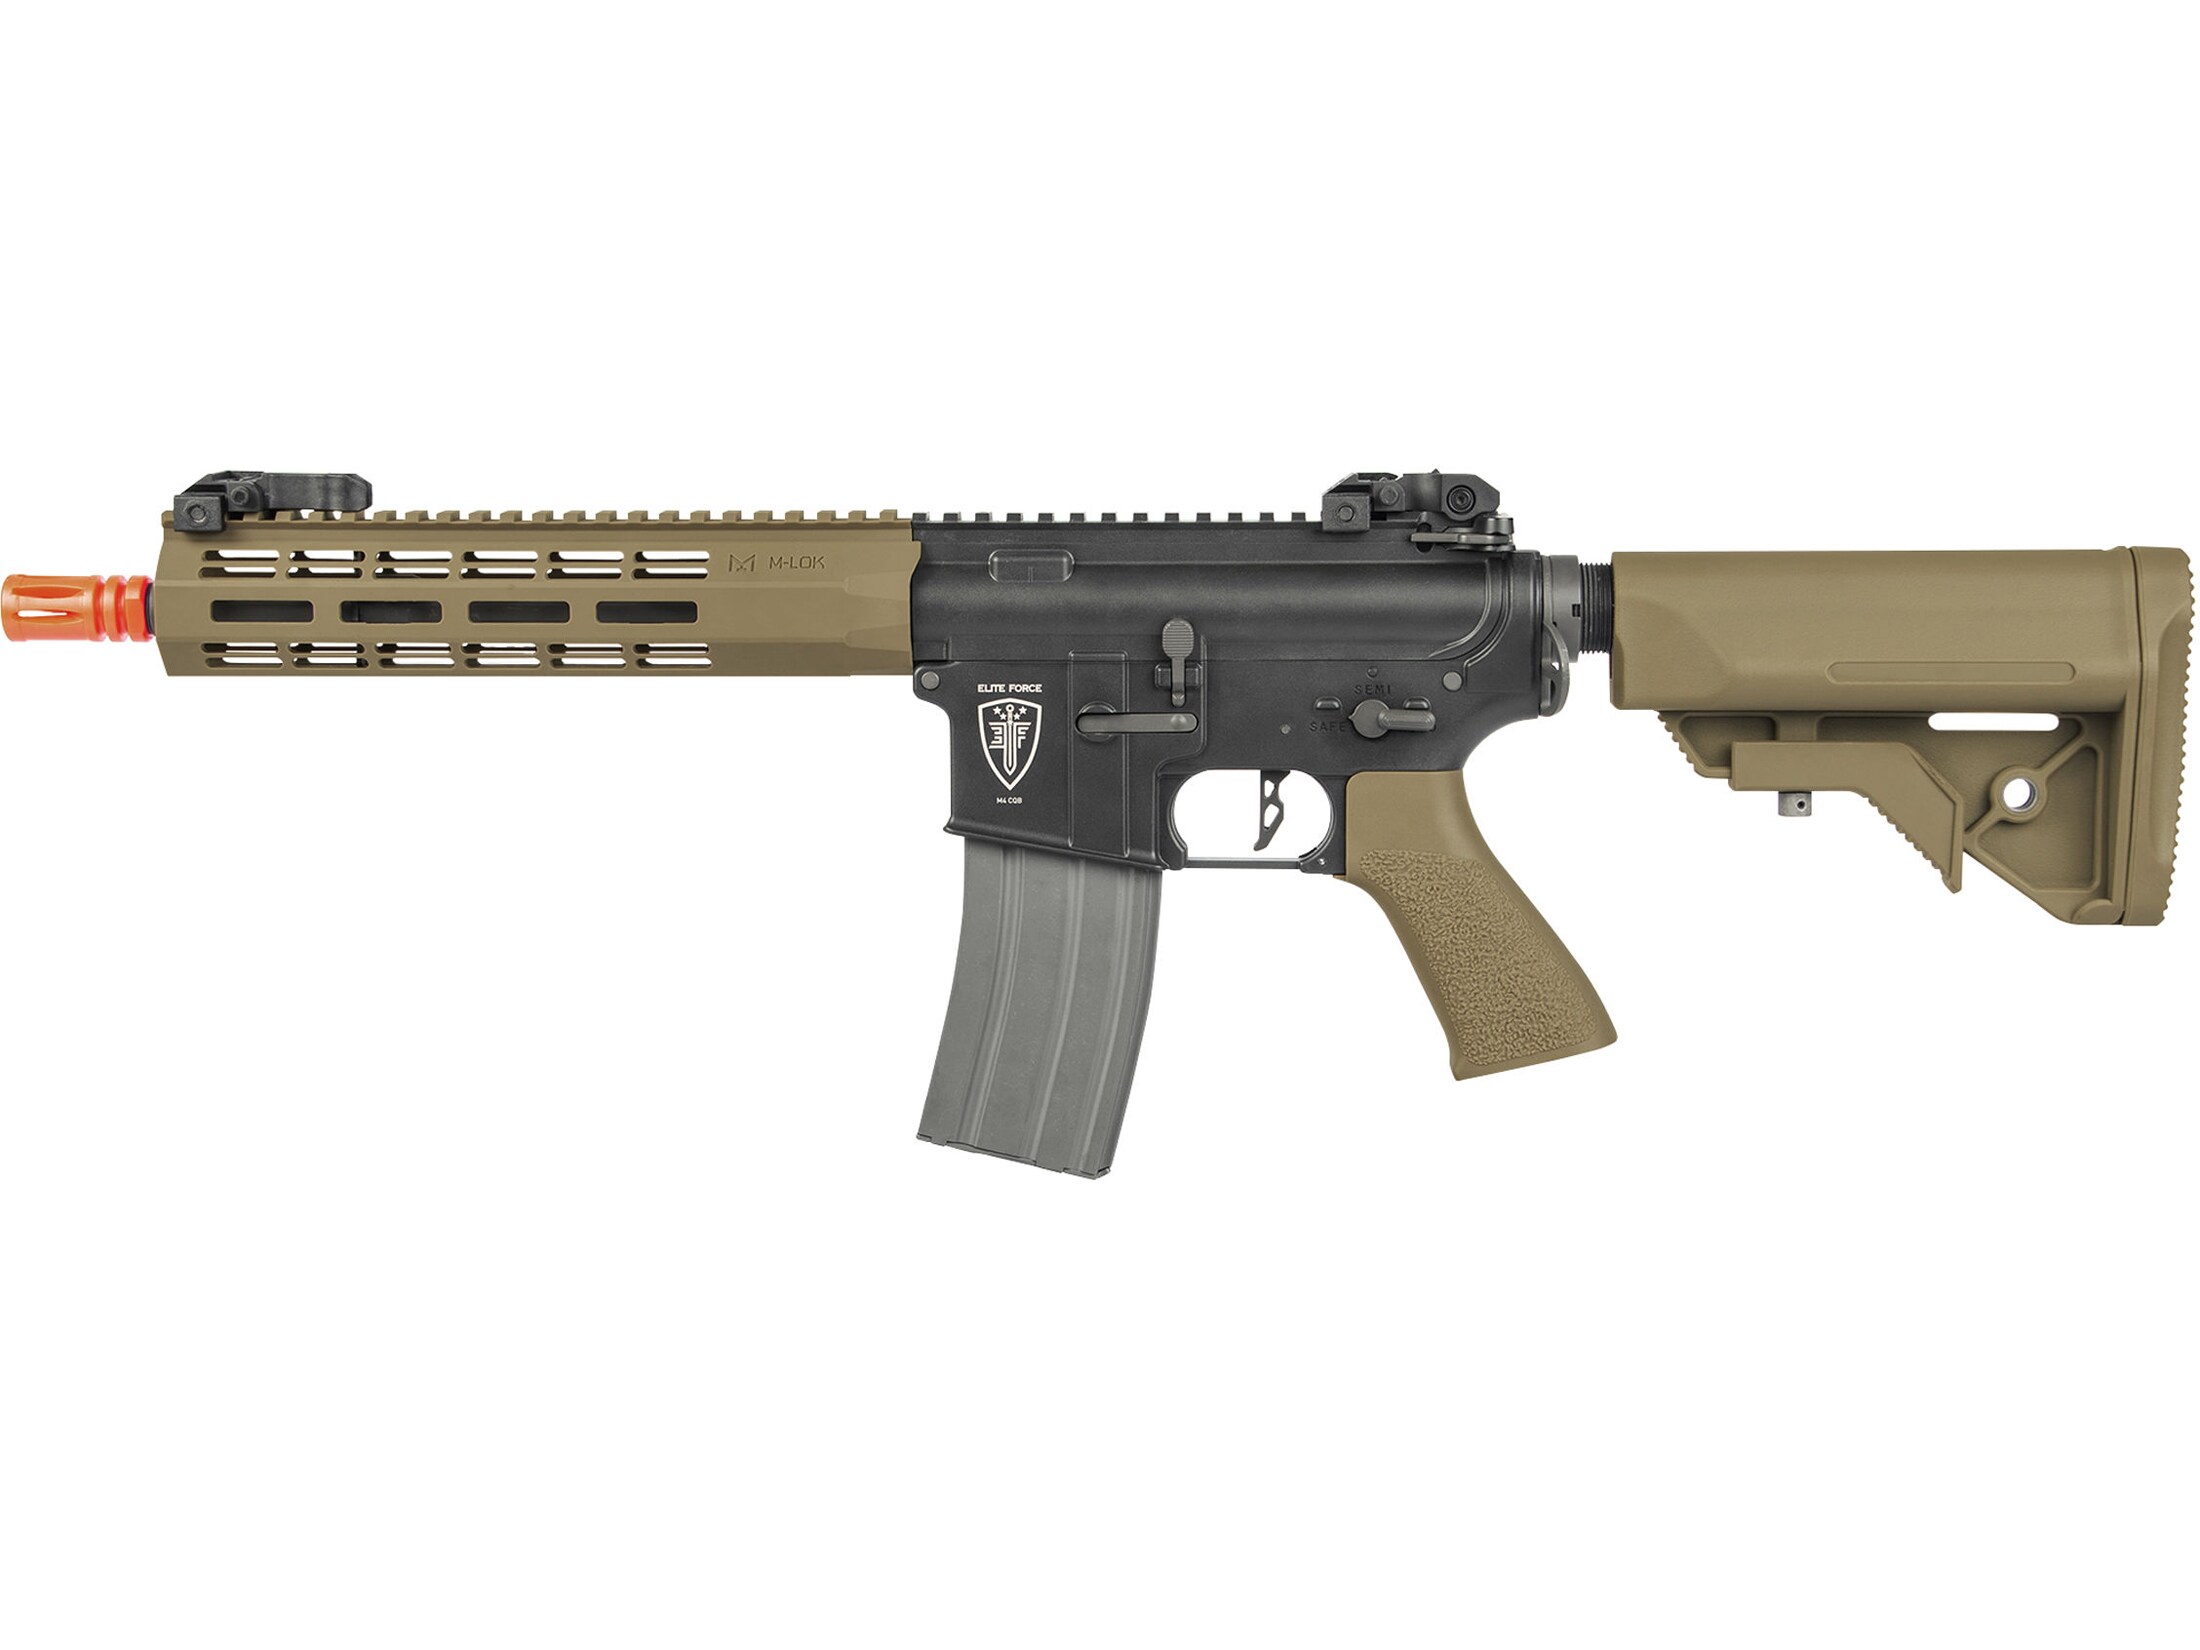 Elite Force M4 CQB Competition AEG Airsoft Rifle 6mm BB Battery Powered Full-Auto Two Tone Tan For Sale